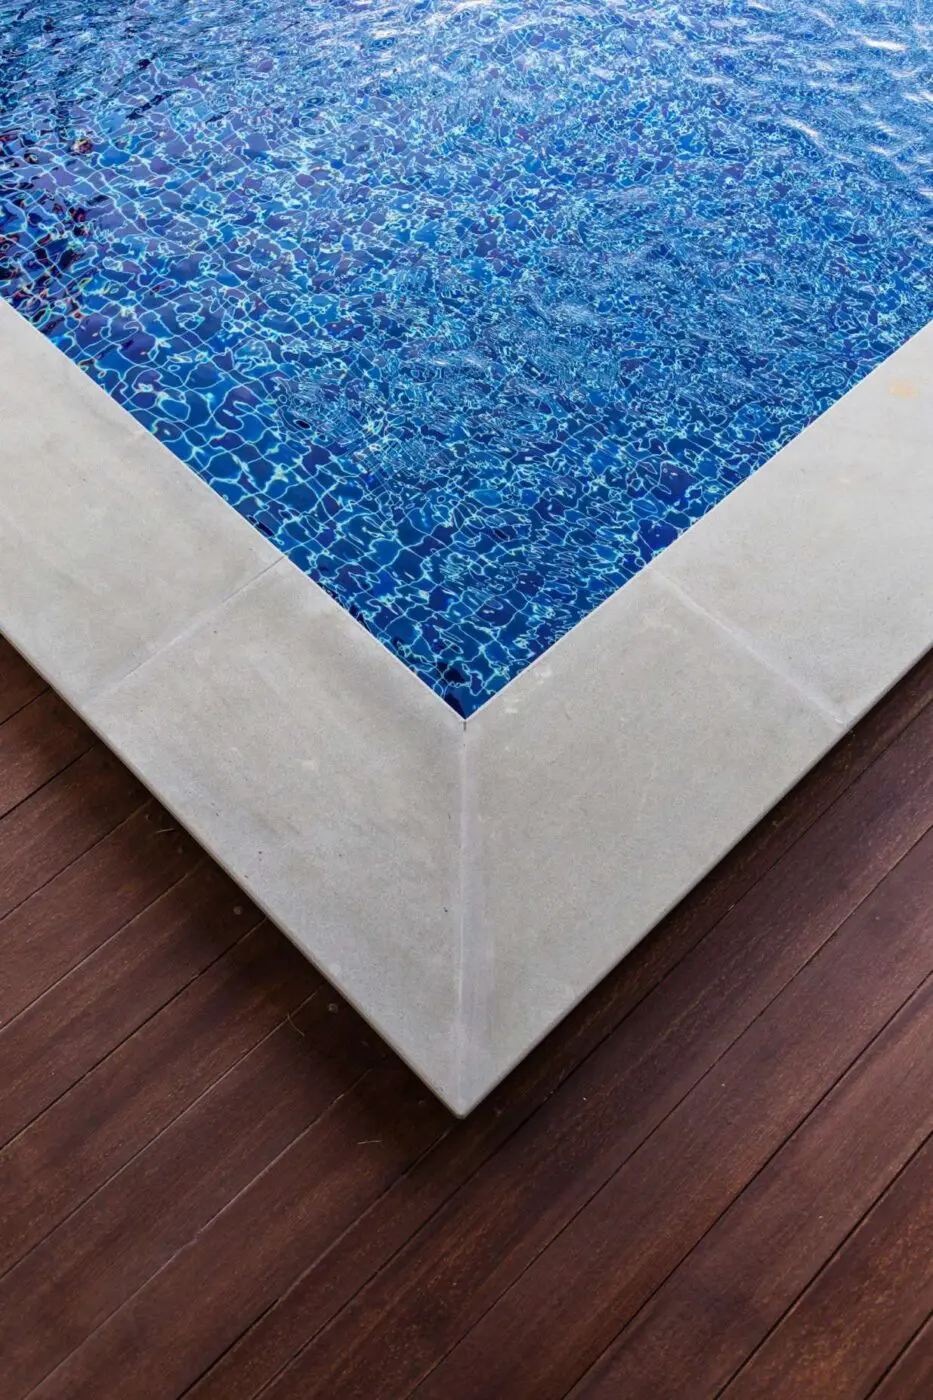 Close-up of a swimming pool corner with vibrant blue water mosaic tiles. The pool's edge is bordered by light-colored stones, adjacent to a wooden deck with a rich brown hue, highlighting the contrast between the deck and the pool. Expertly designed by Lauderdale Concrete in Coral Springs FL.